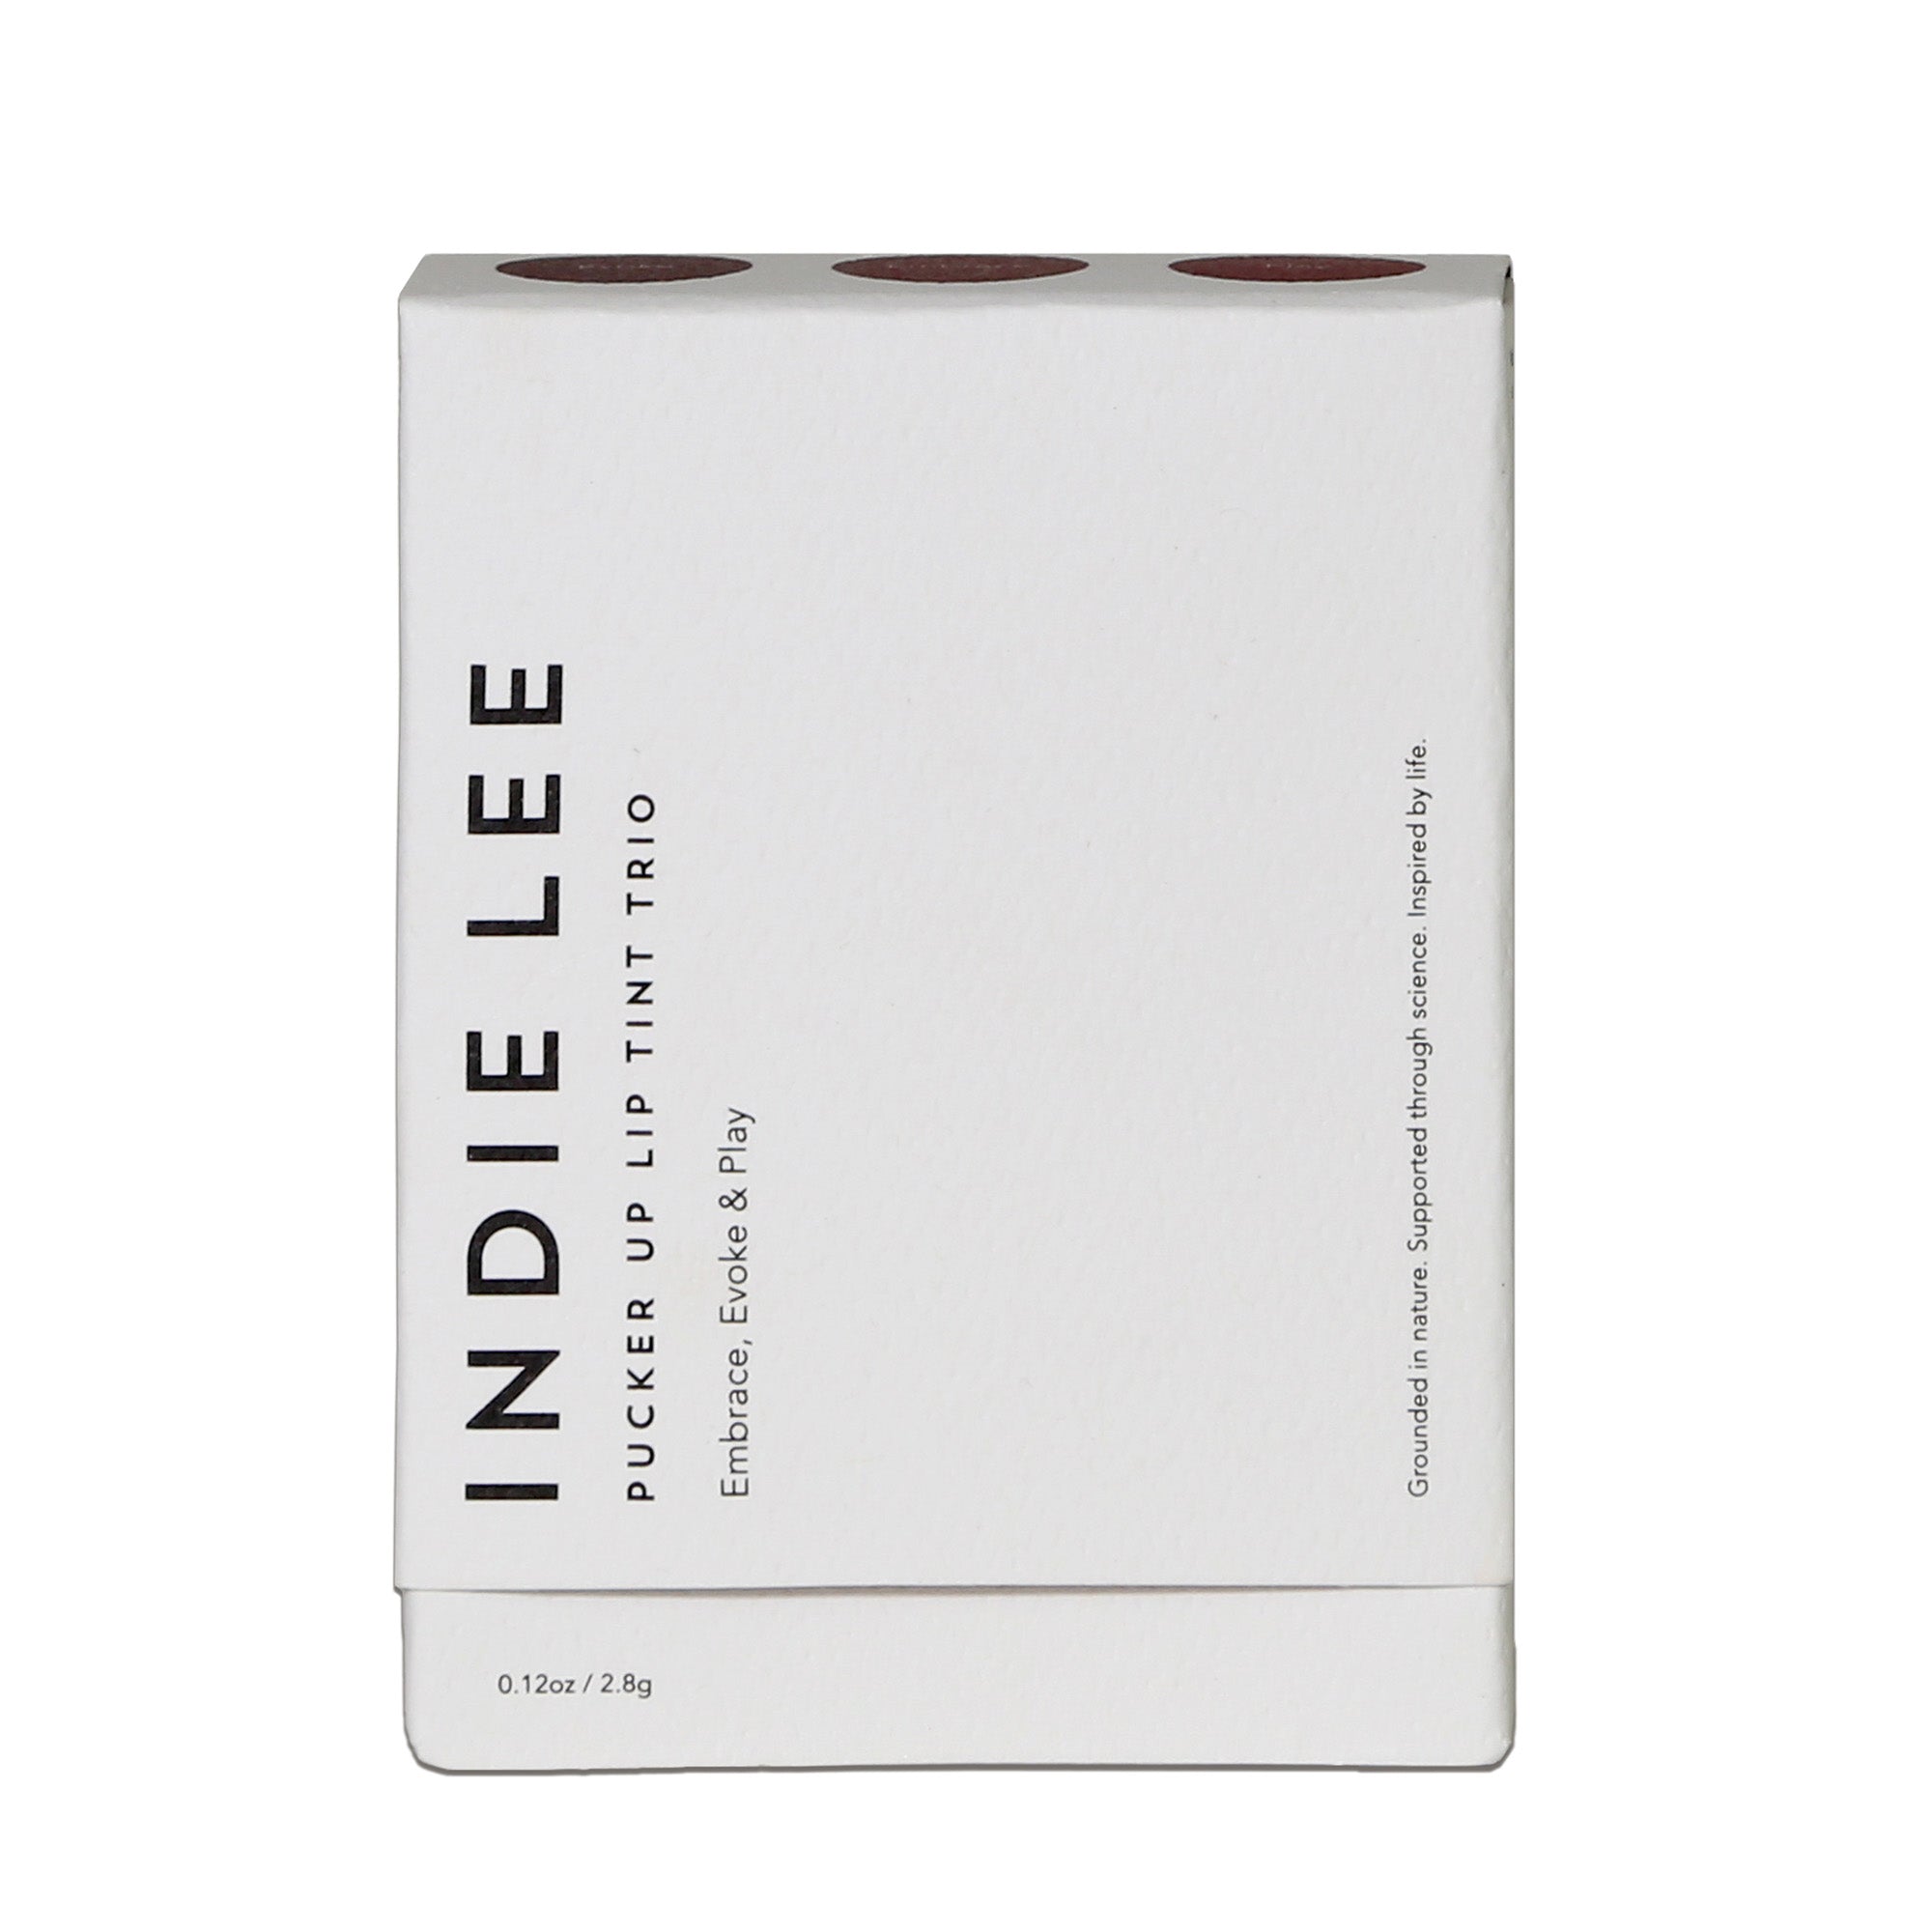 Pucker Up Lip Trio by Indie Lee available online in Canada at Socialite Beauty